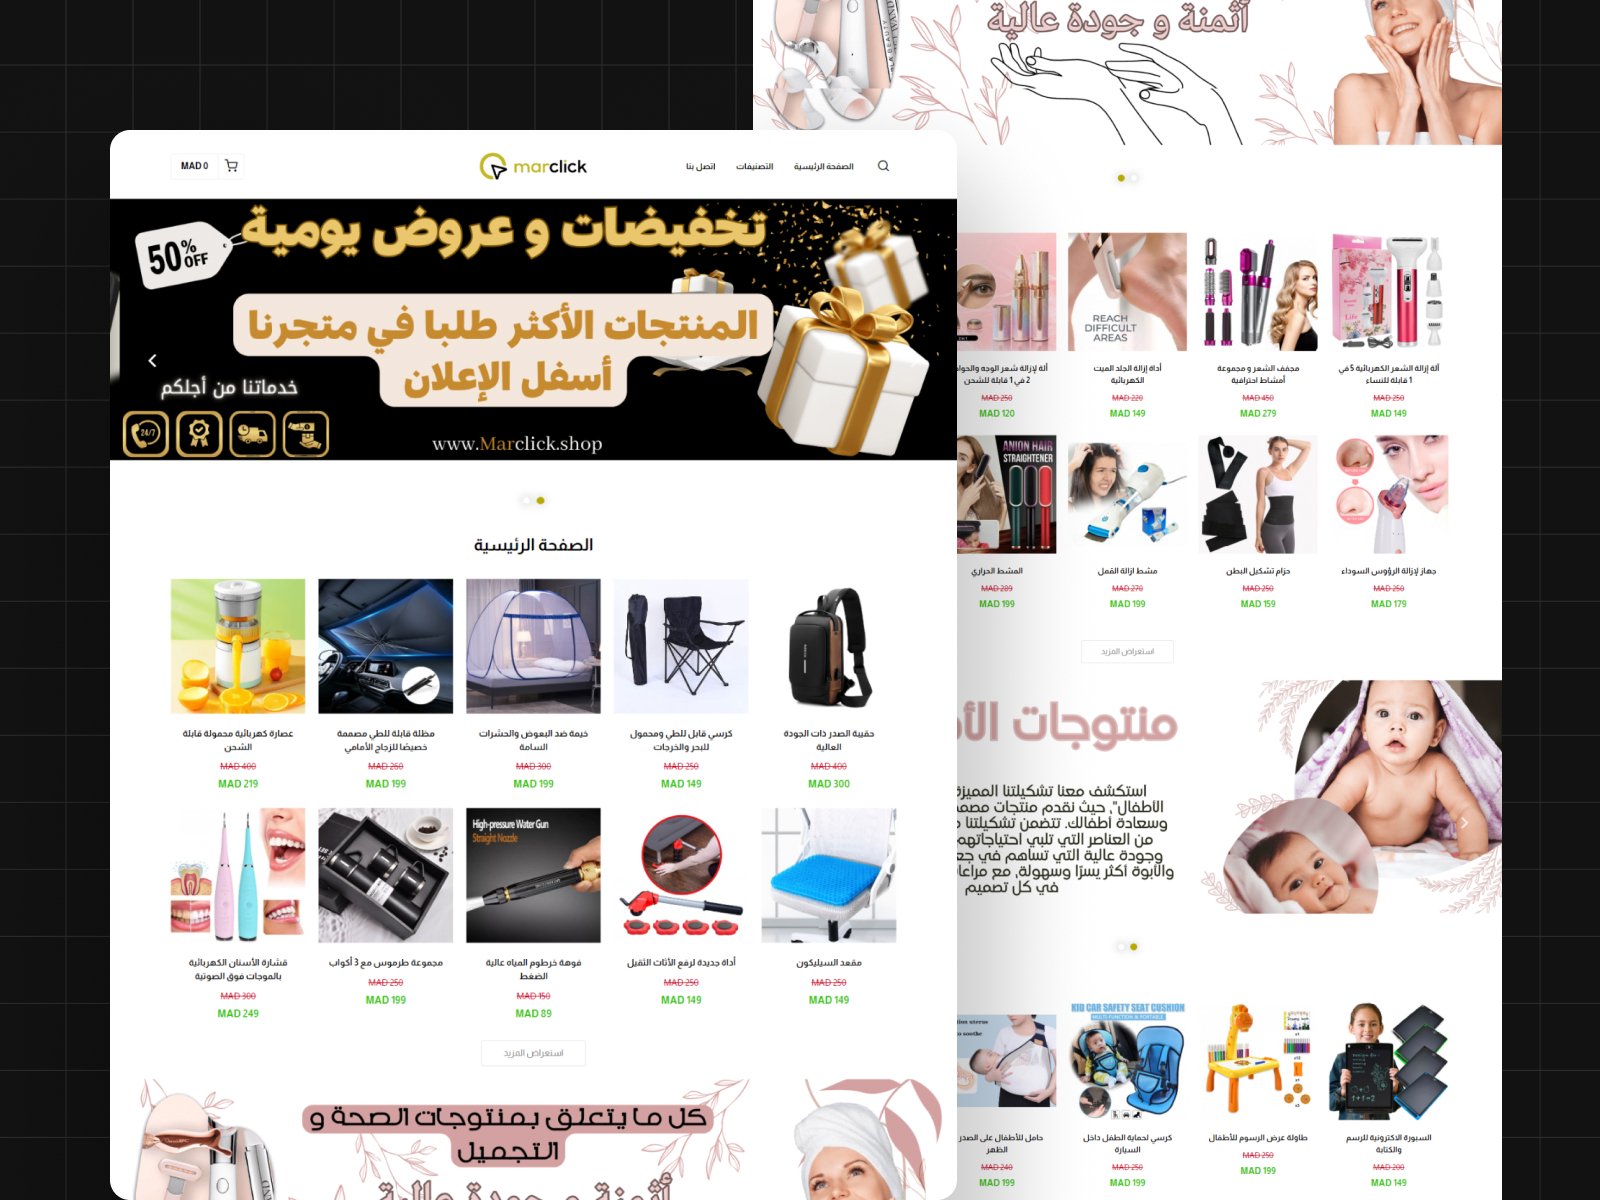 marclick shop ecommerce website made by qodiv